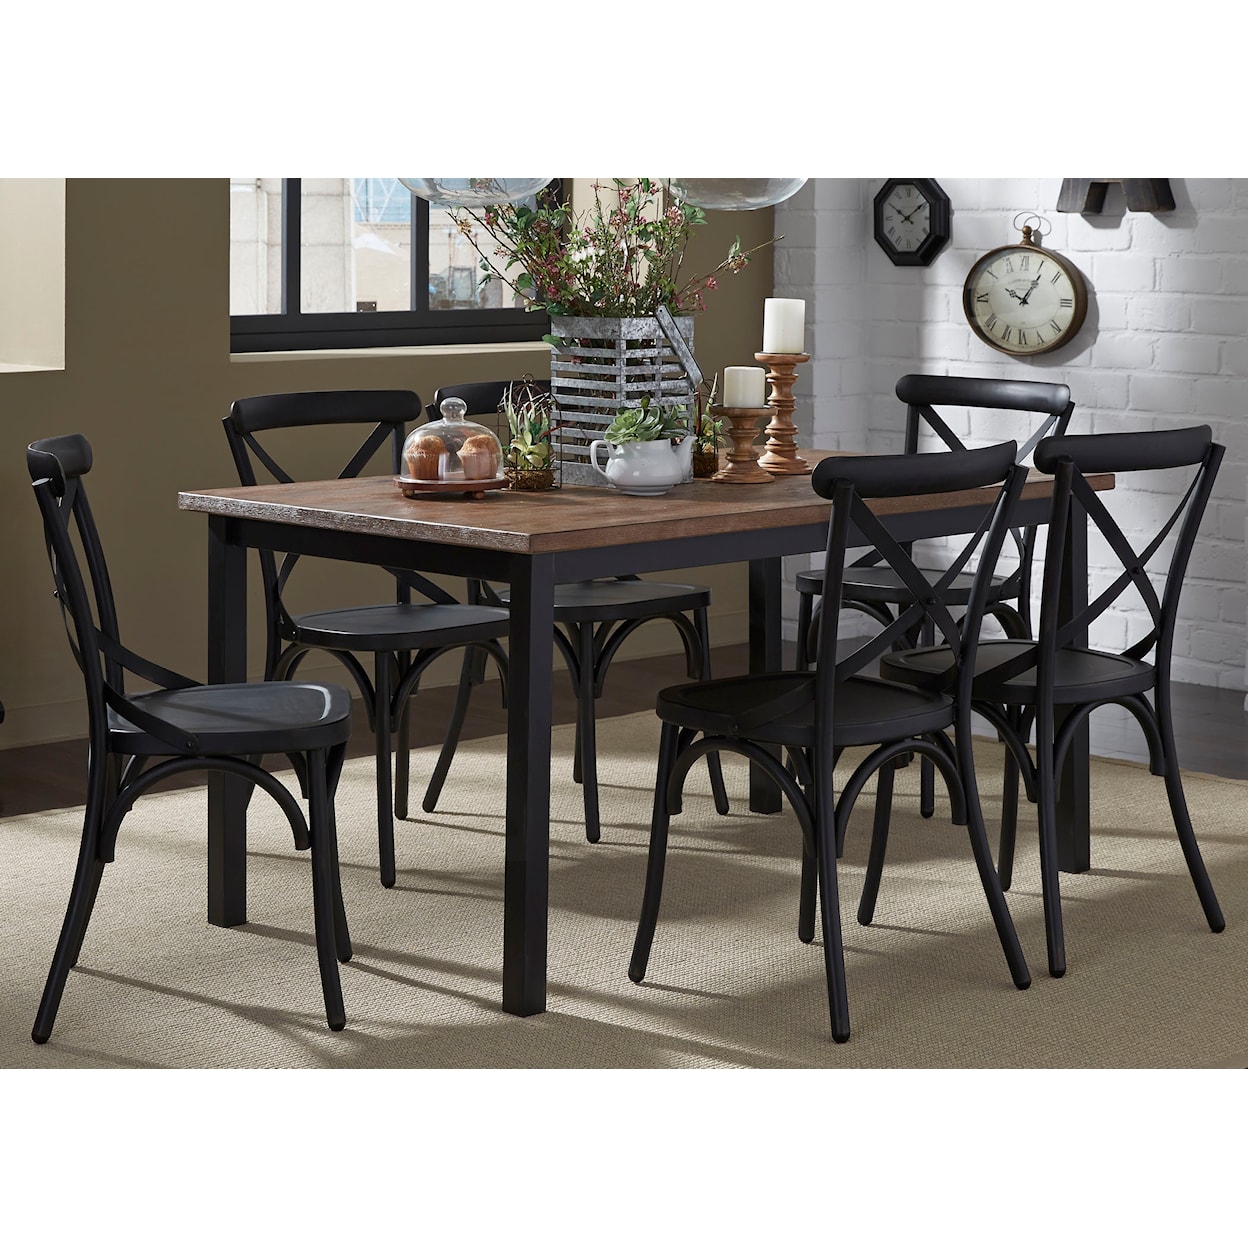 Liberty Furniture Vintage Dining Series 7-Piece Table and Chair Set